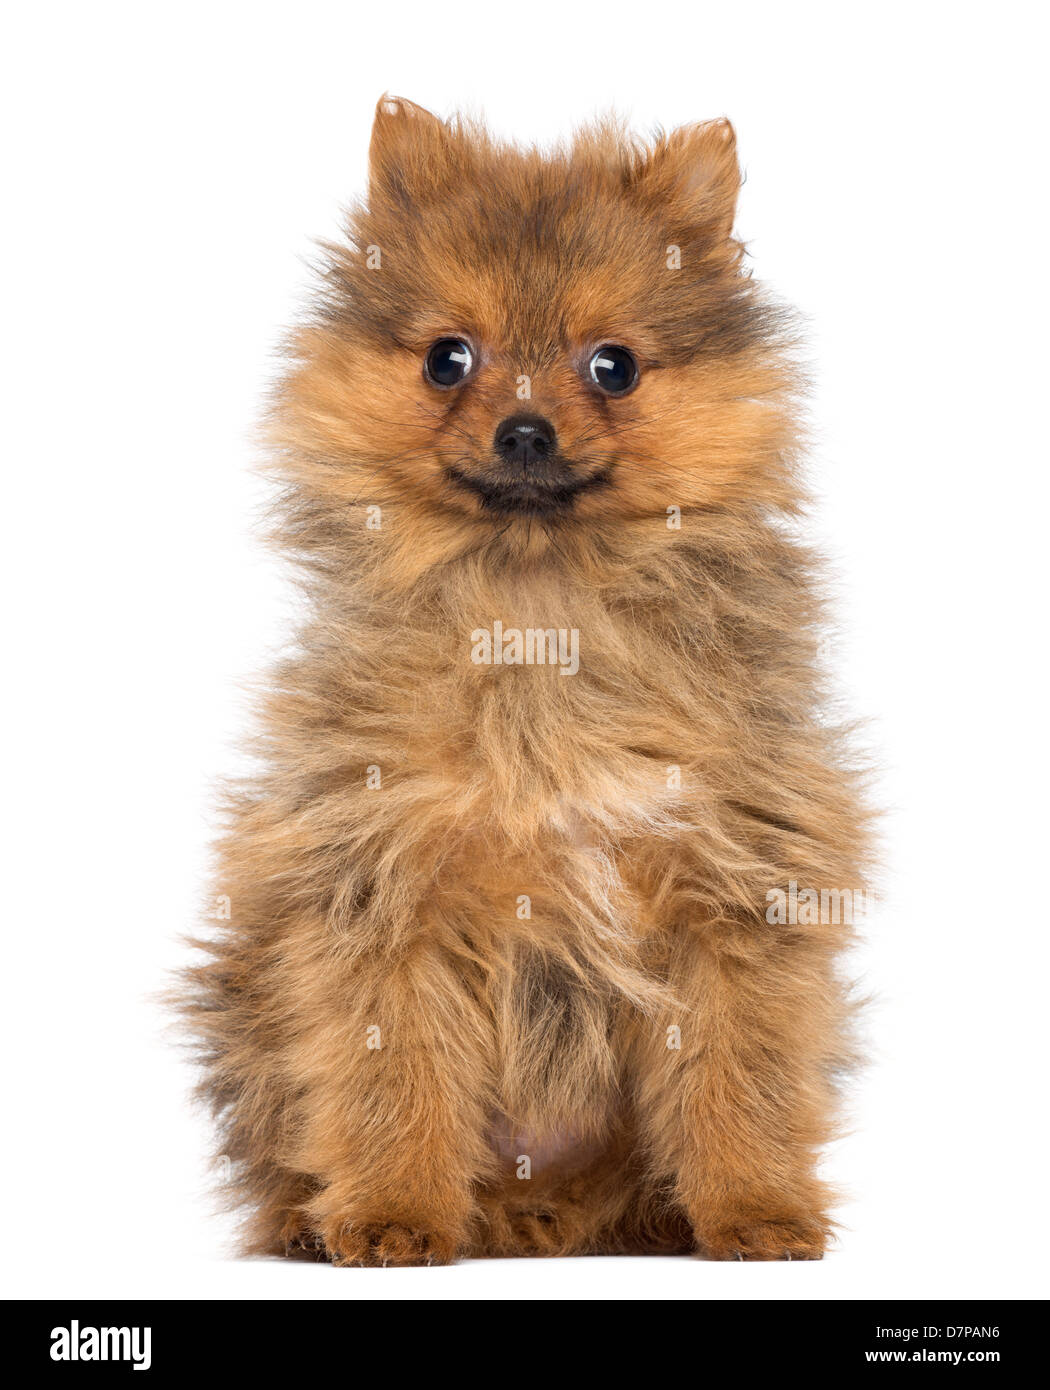 Smiling Pomeranian Puppy, 2 months old, sitting against white background Stock Photo